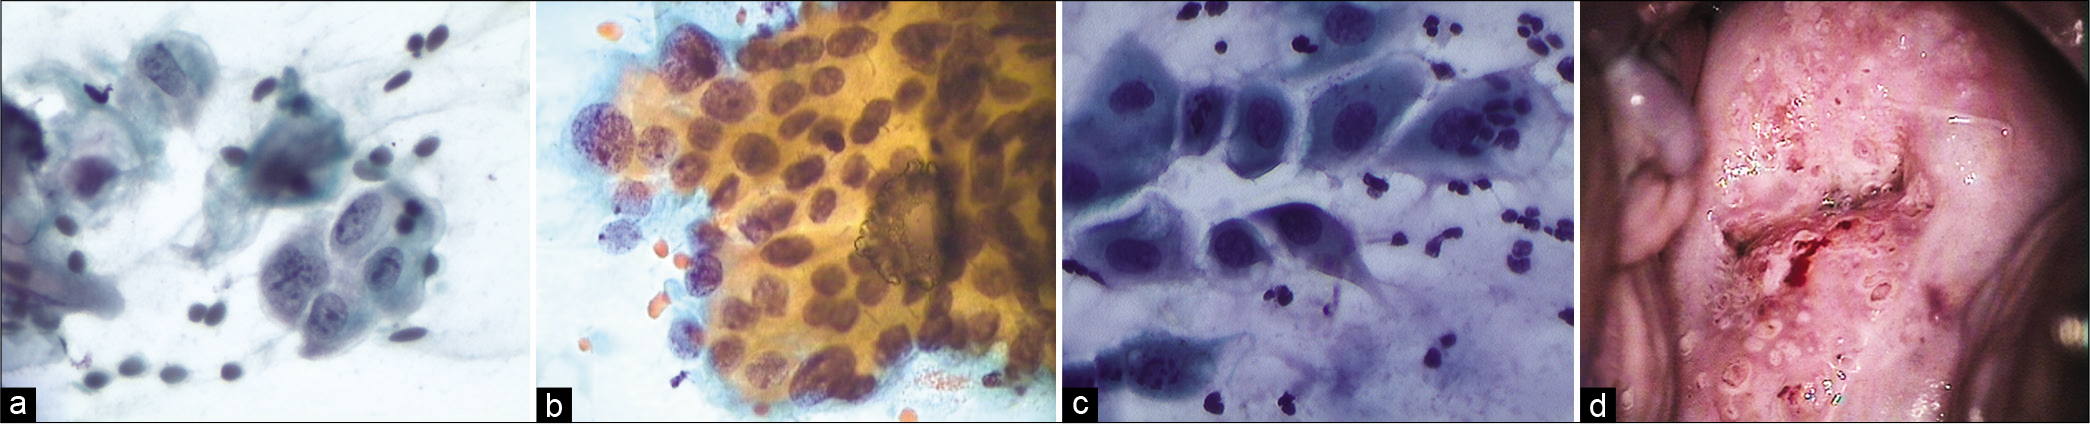 (a-d) CPS (×40) – Immature metaplastic cells in a reactive process show nucleoli, smooth membranes (a and b), and inflammatory cells either engulfed by these reactive cells. (c) Follow-up colposcopy. (d) Thick metaplastic islands around glandular openings and there was no evidence of CIN lesion.